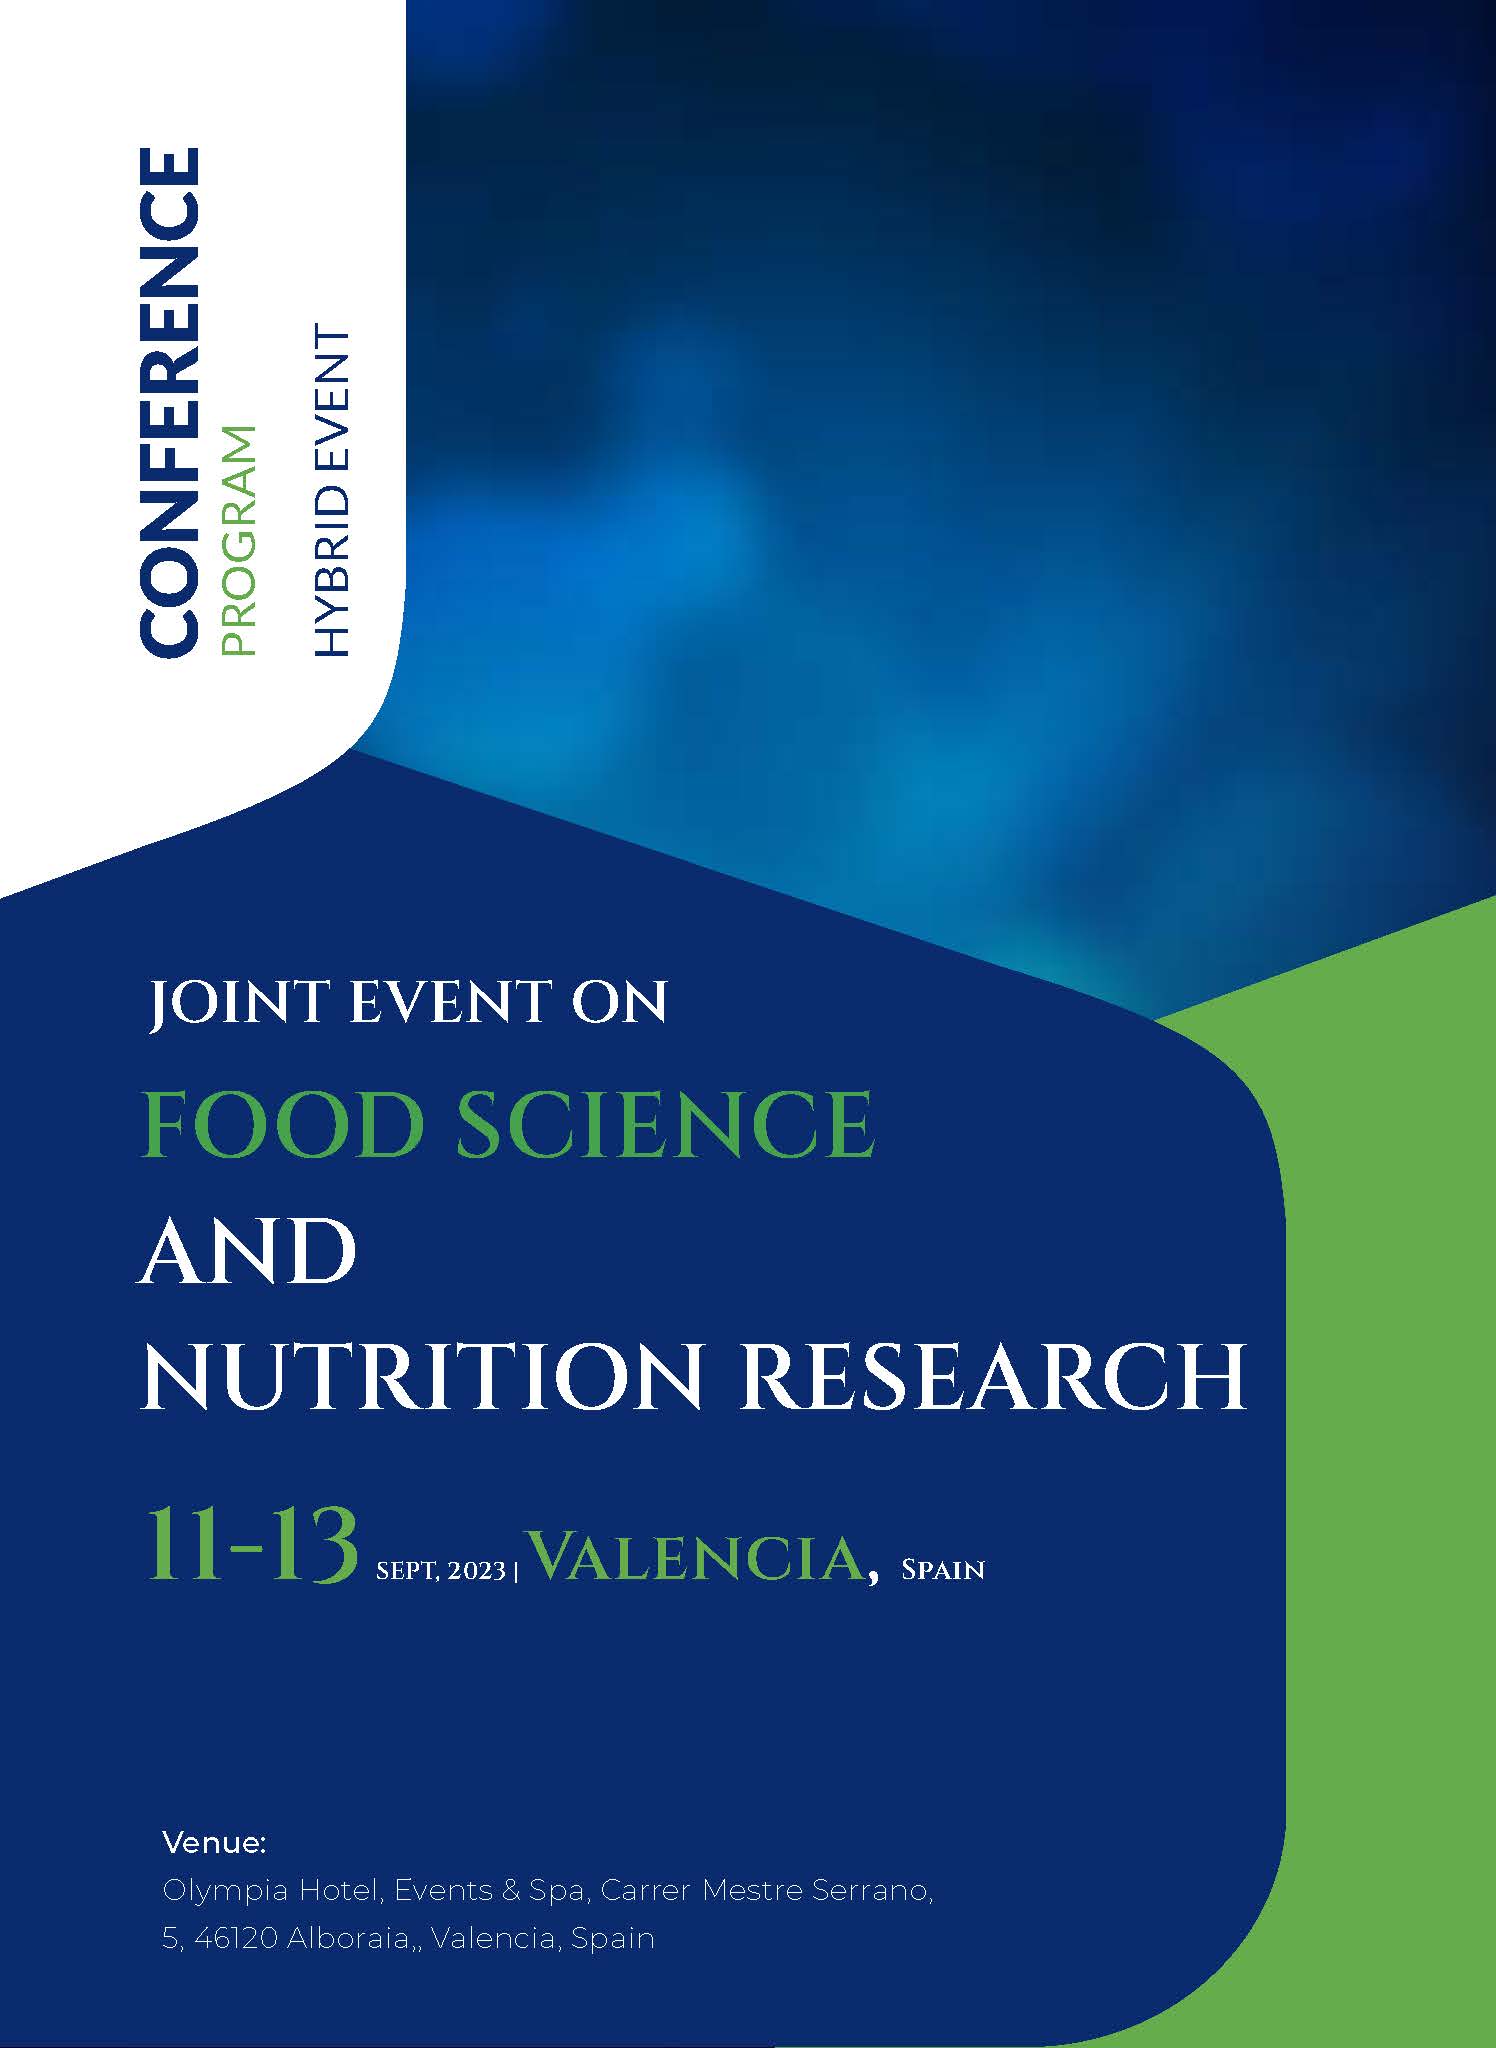 Nutrition Research Conference | Valencia, Spain Program